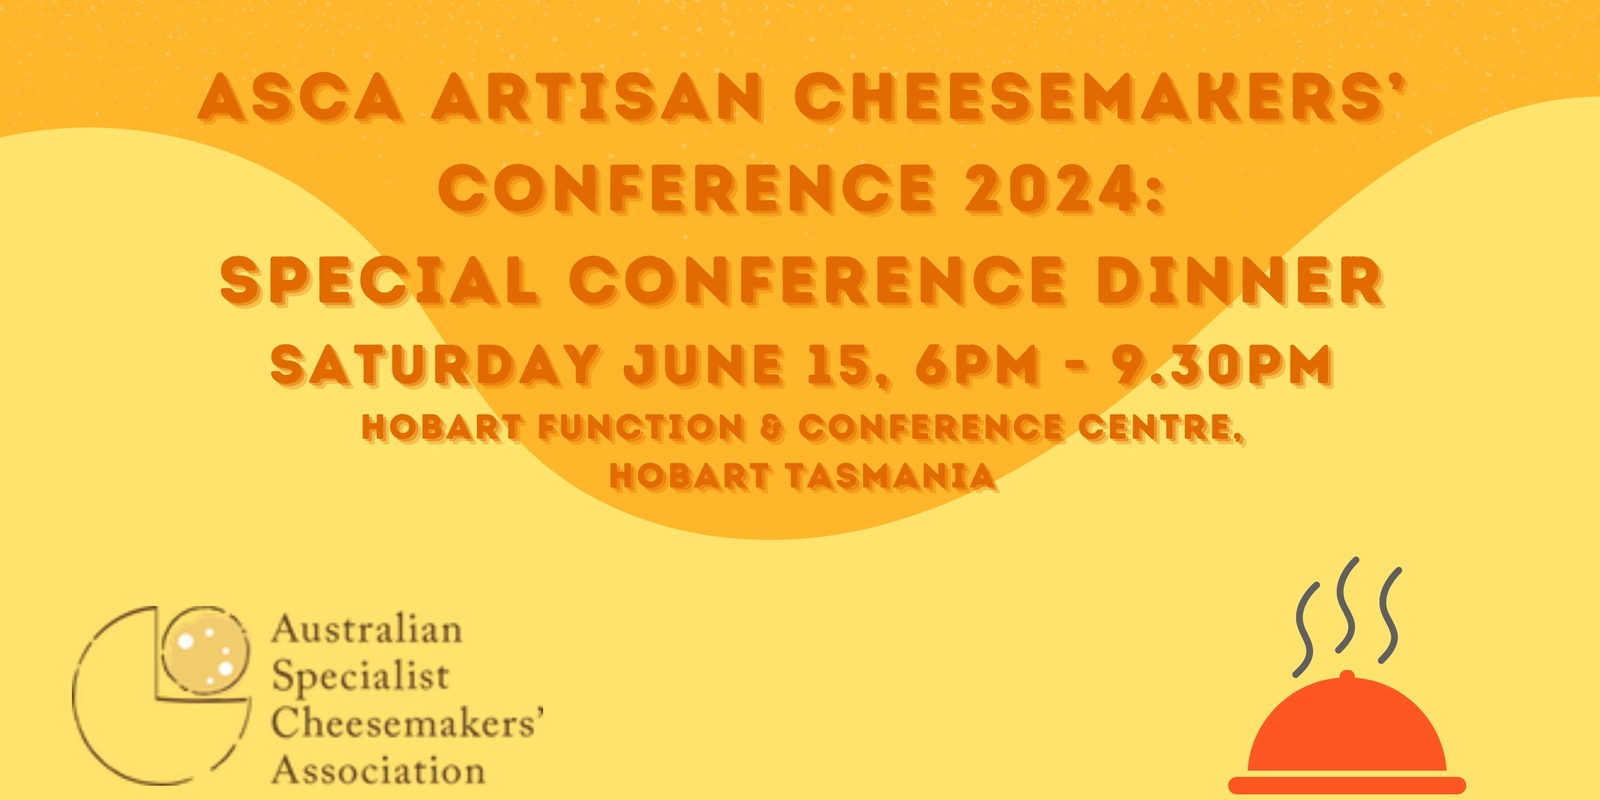 Banner image for ASCA ARTISAN CHEESEMAKERS' CONFERENCE DINNER 2024:  Conference Dinner Saturday July 15th 6pm - 9.30pm (optional)